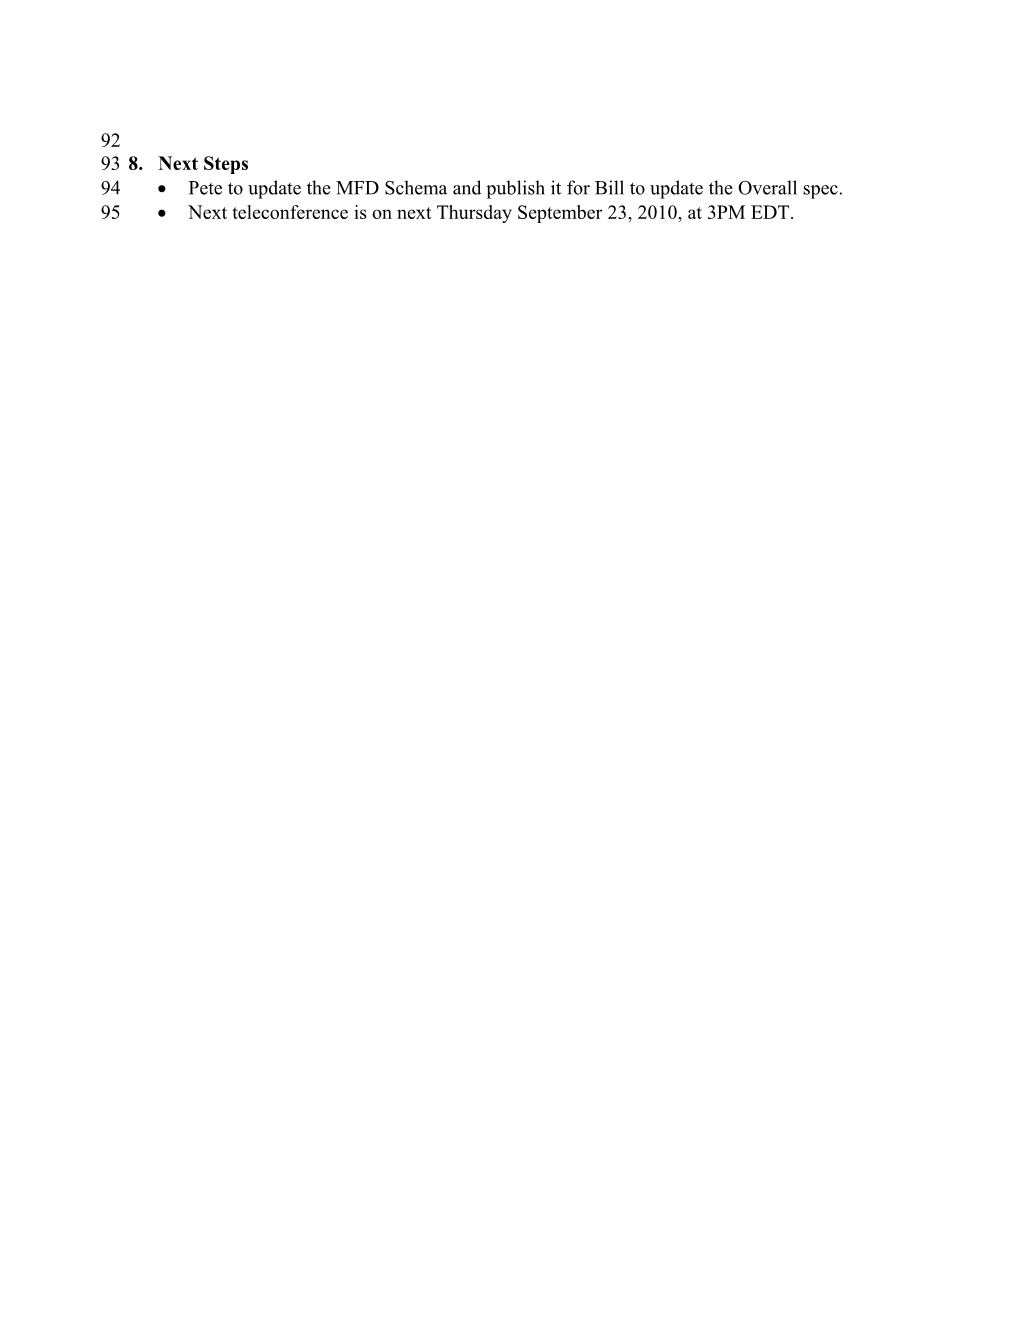 PWG MFD Working Group Teleconference Meeting Minutes